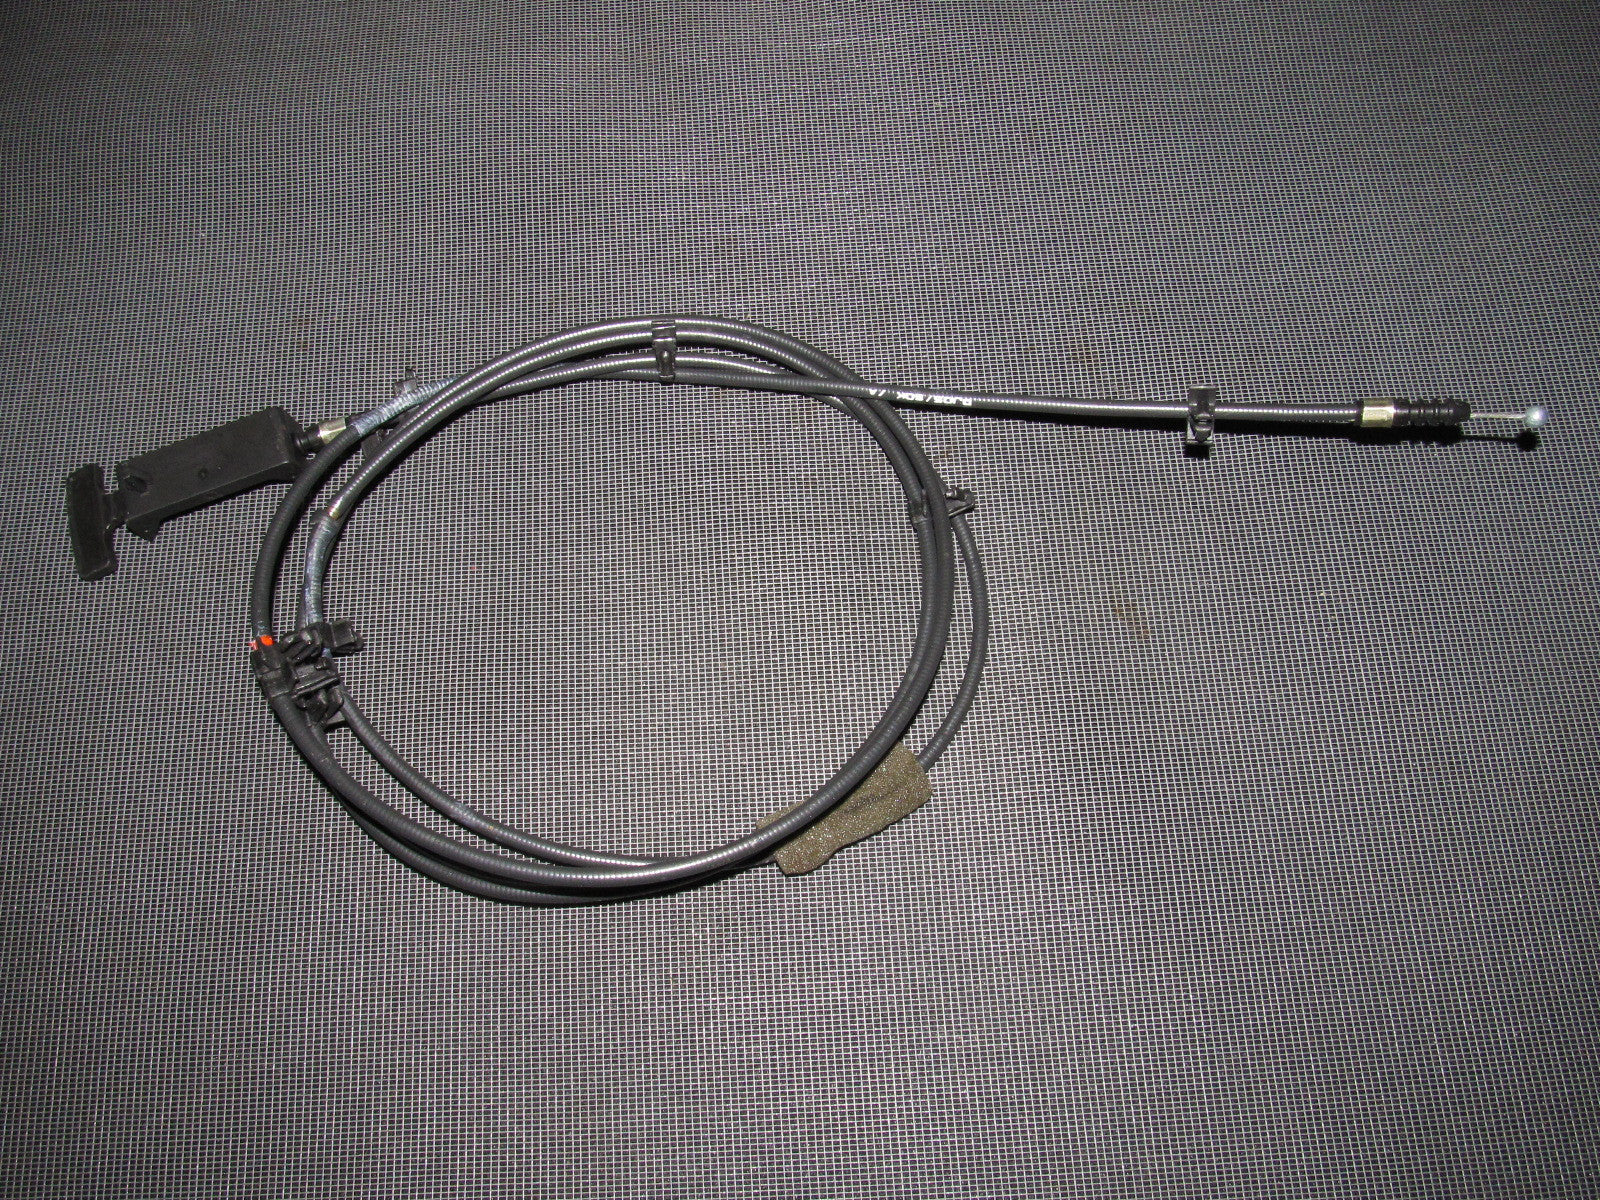 01 02 03 Acura CL OEM Rear Seat Trunk Release Cable